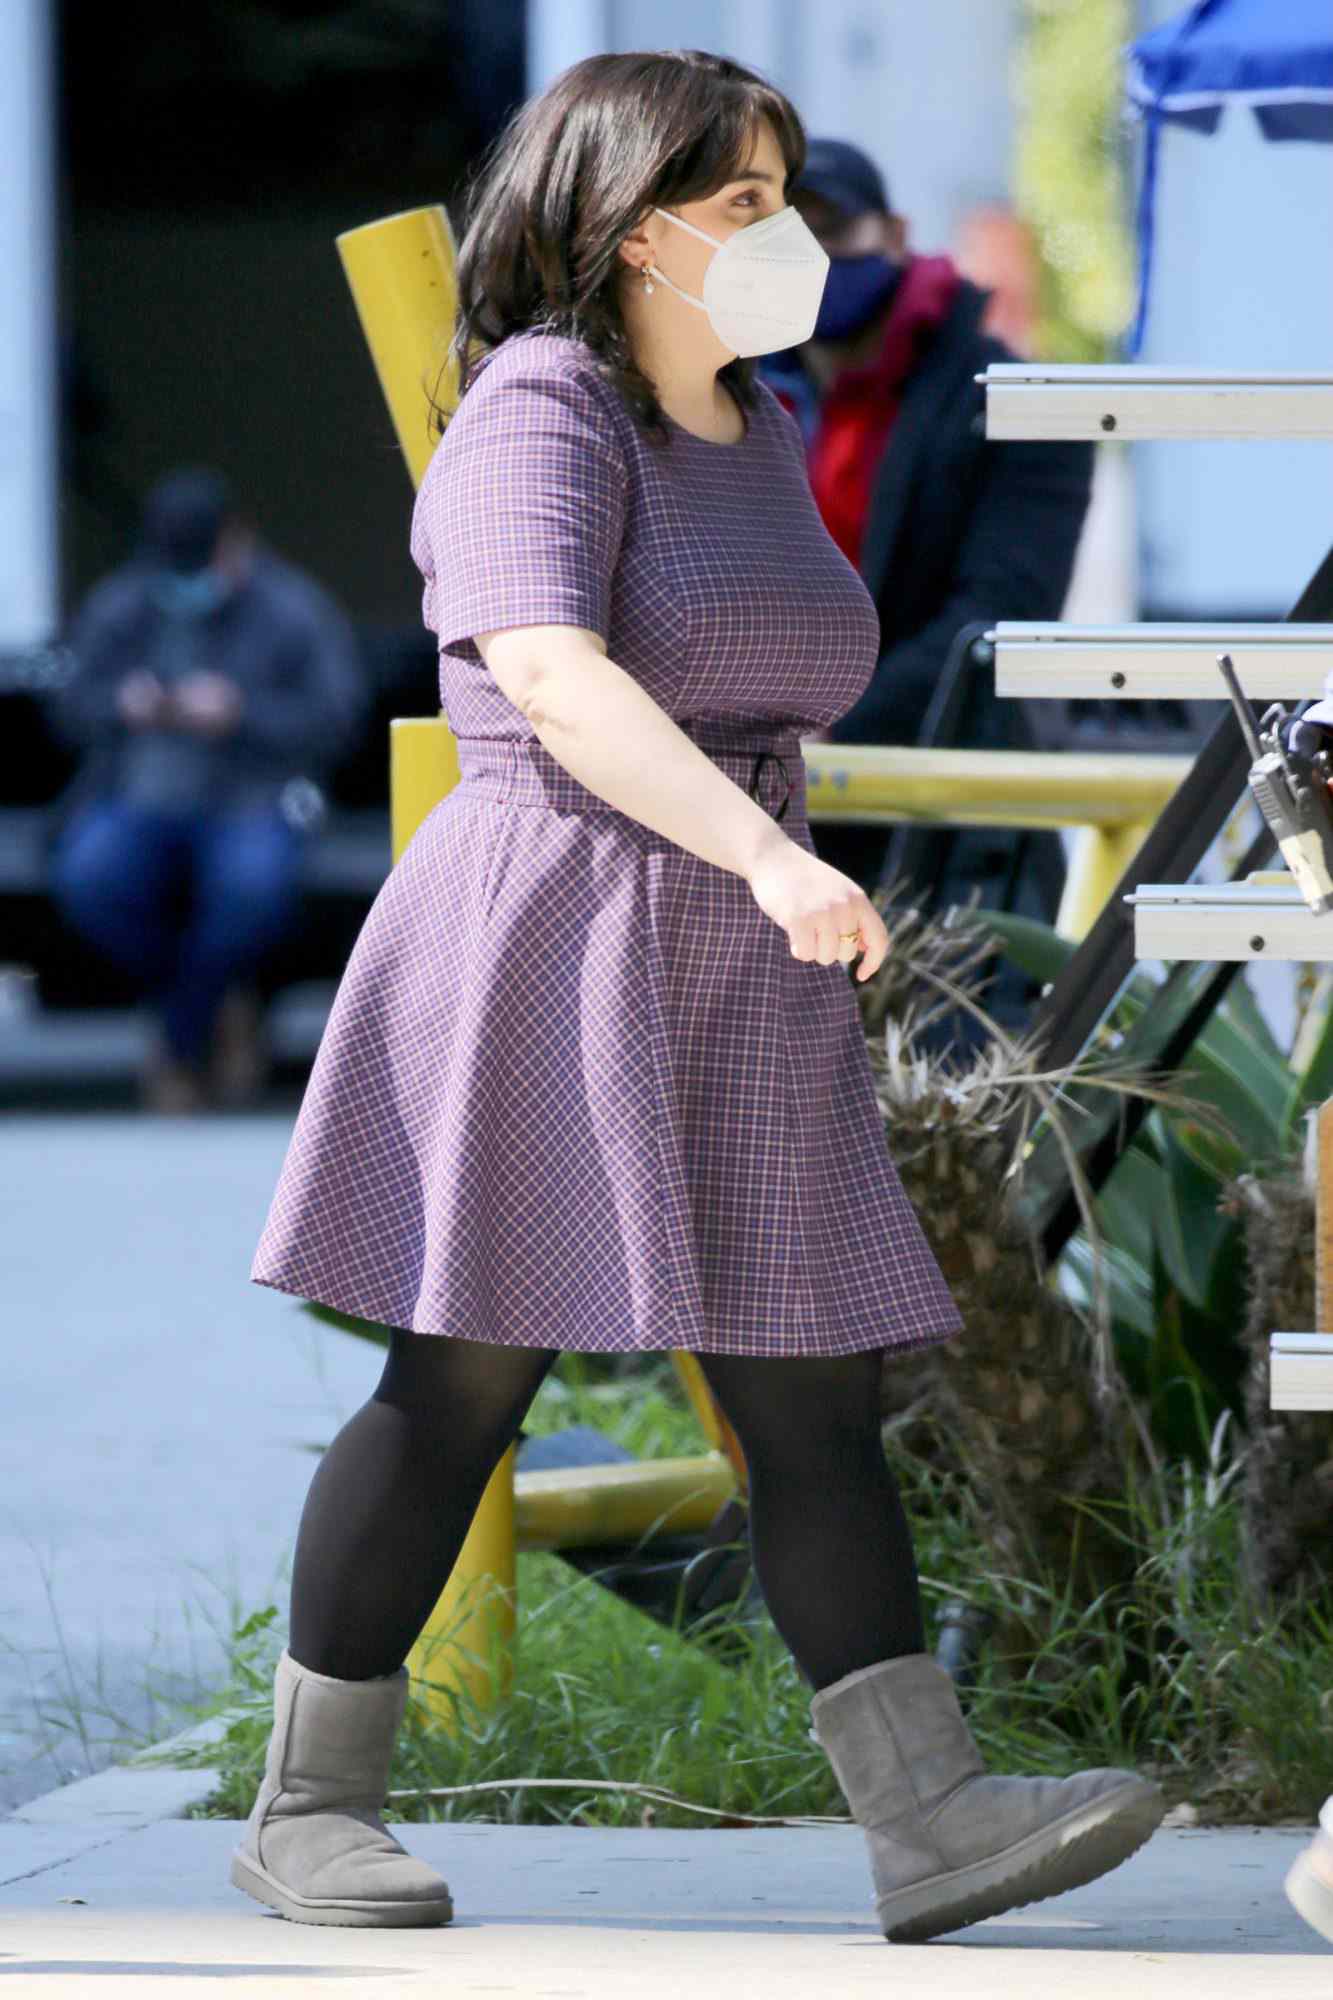 Beanie Feldstein is Pictured on the Set of 'American Crime Story: Impeachment' Filming in Los Angeles.